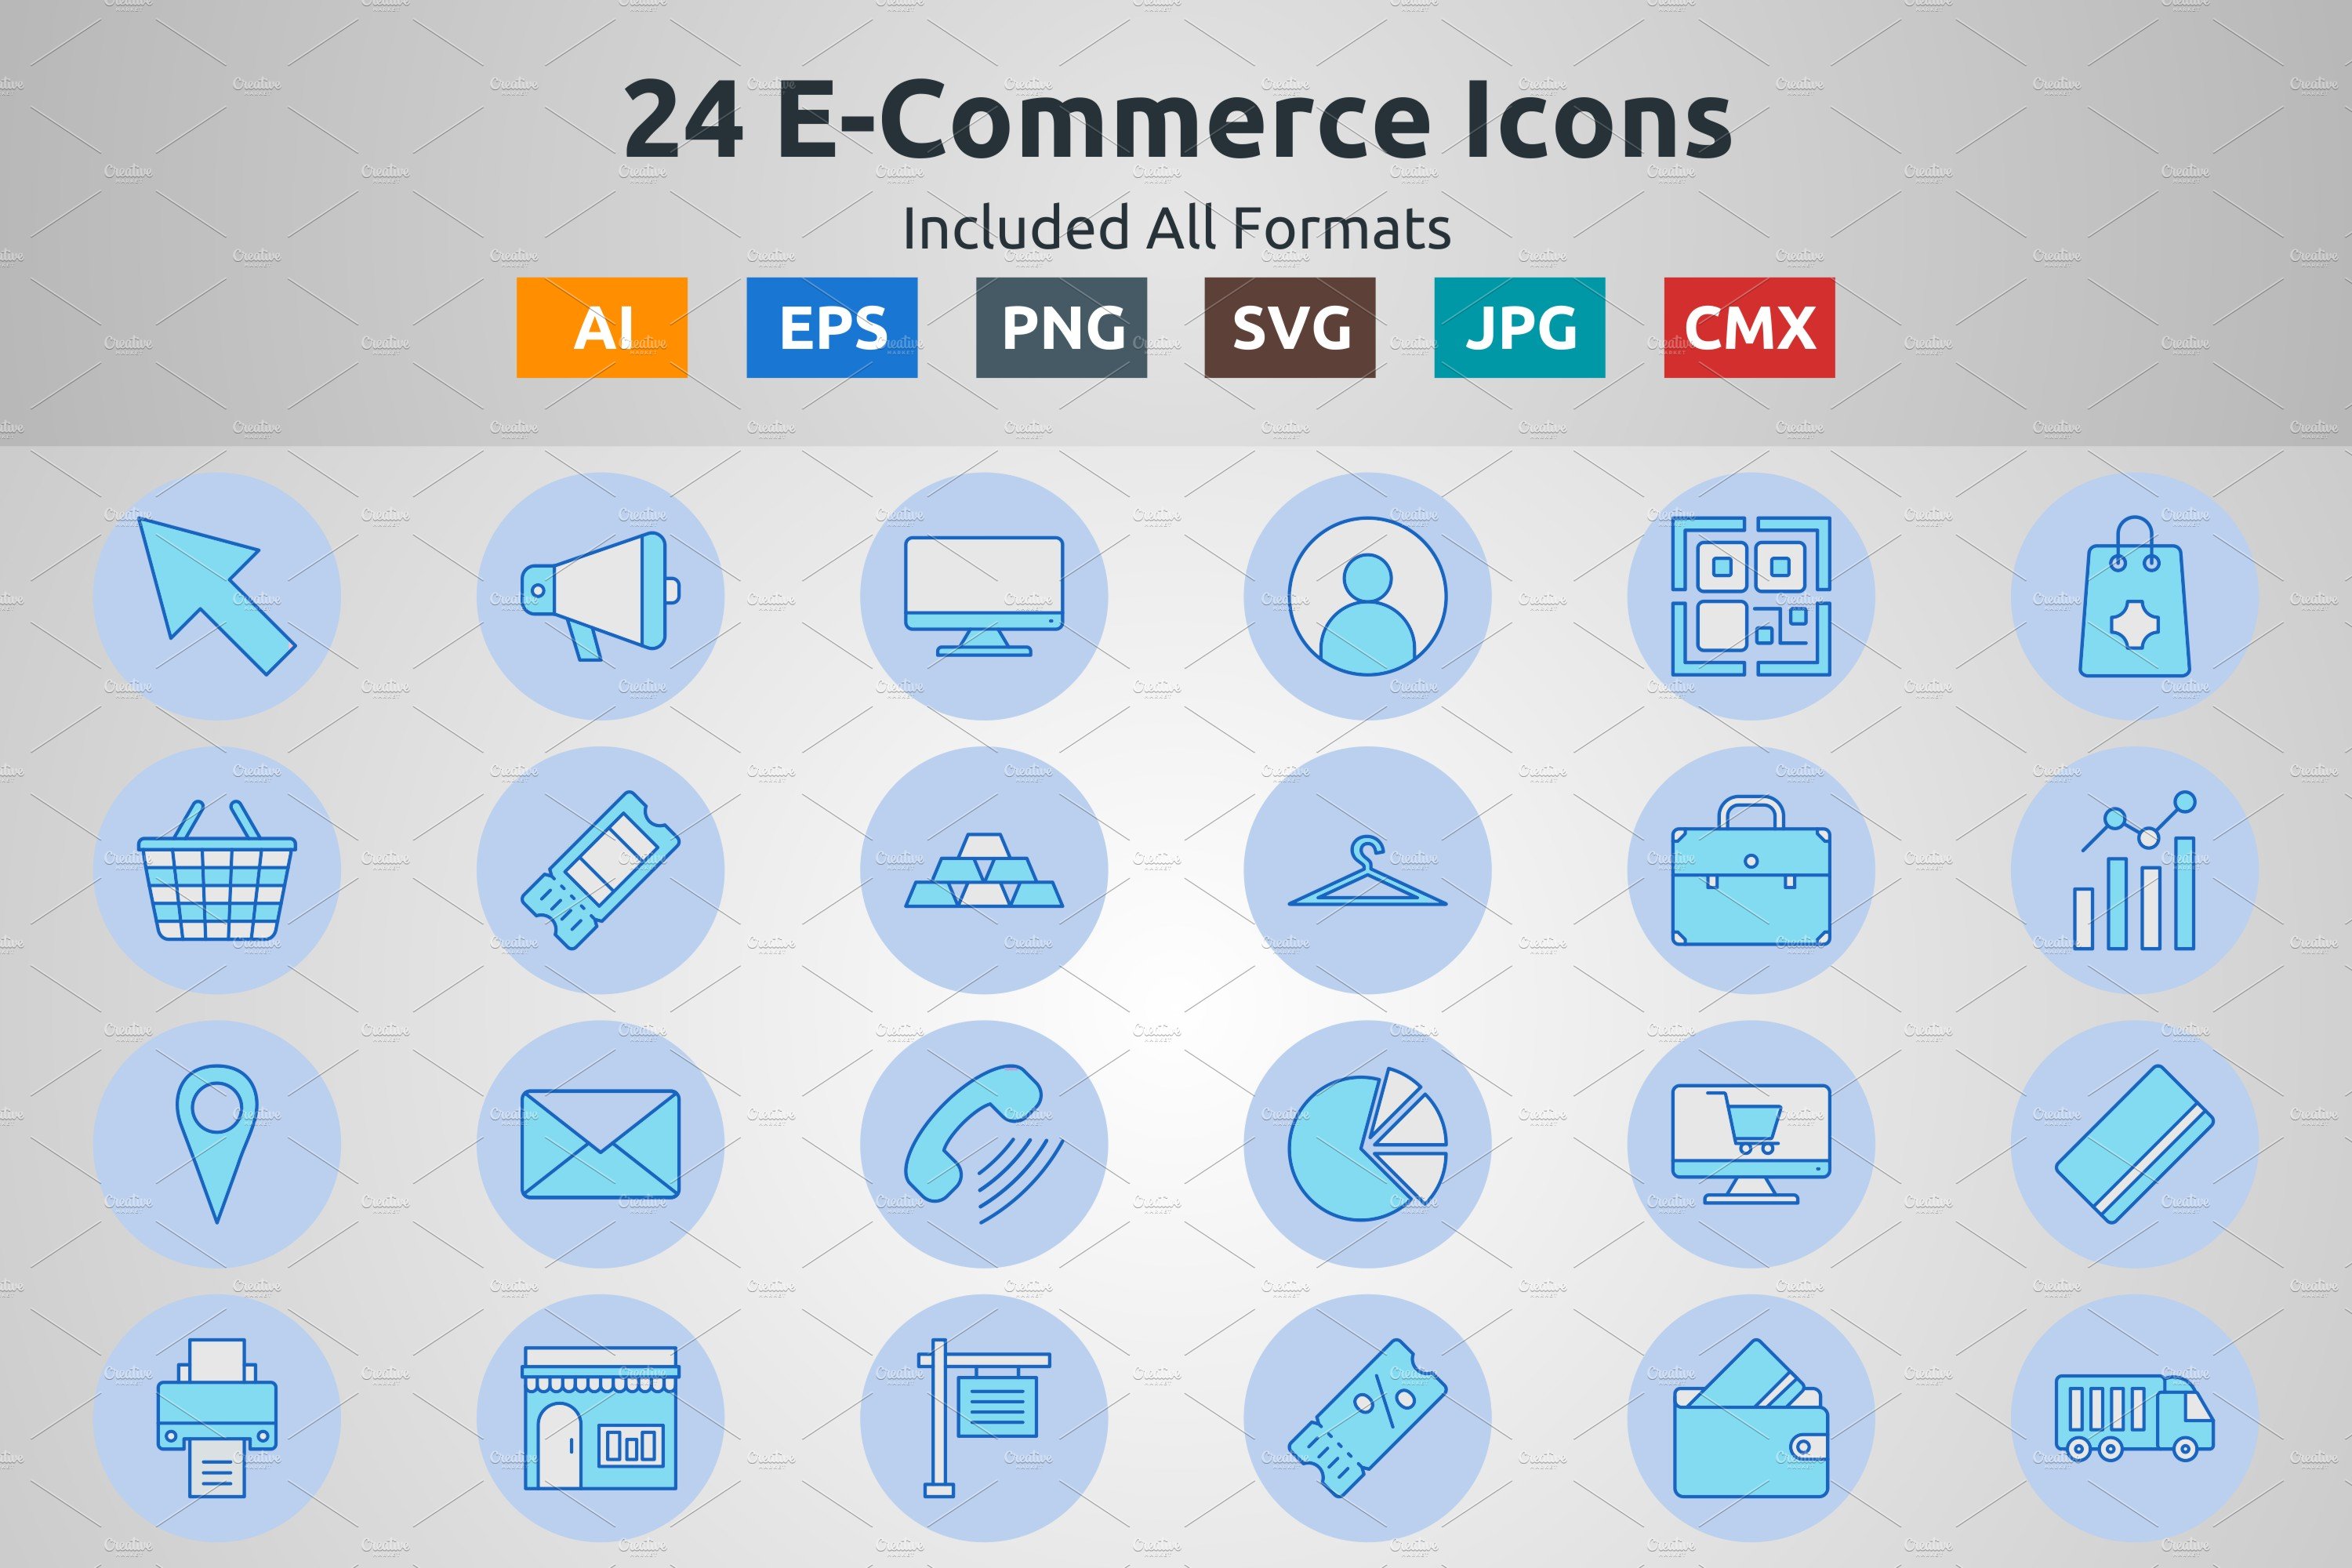 Blue Filled Circle E-Commerce Icon cover image.